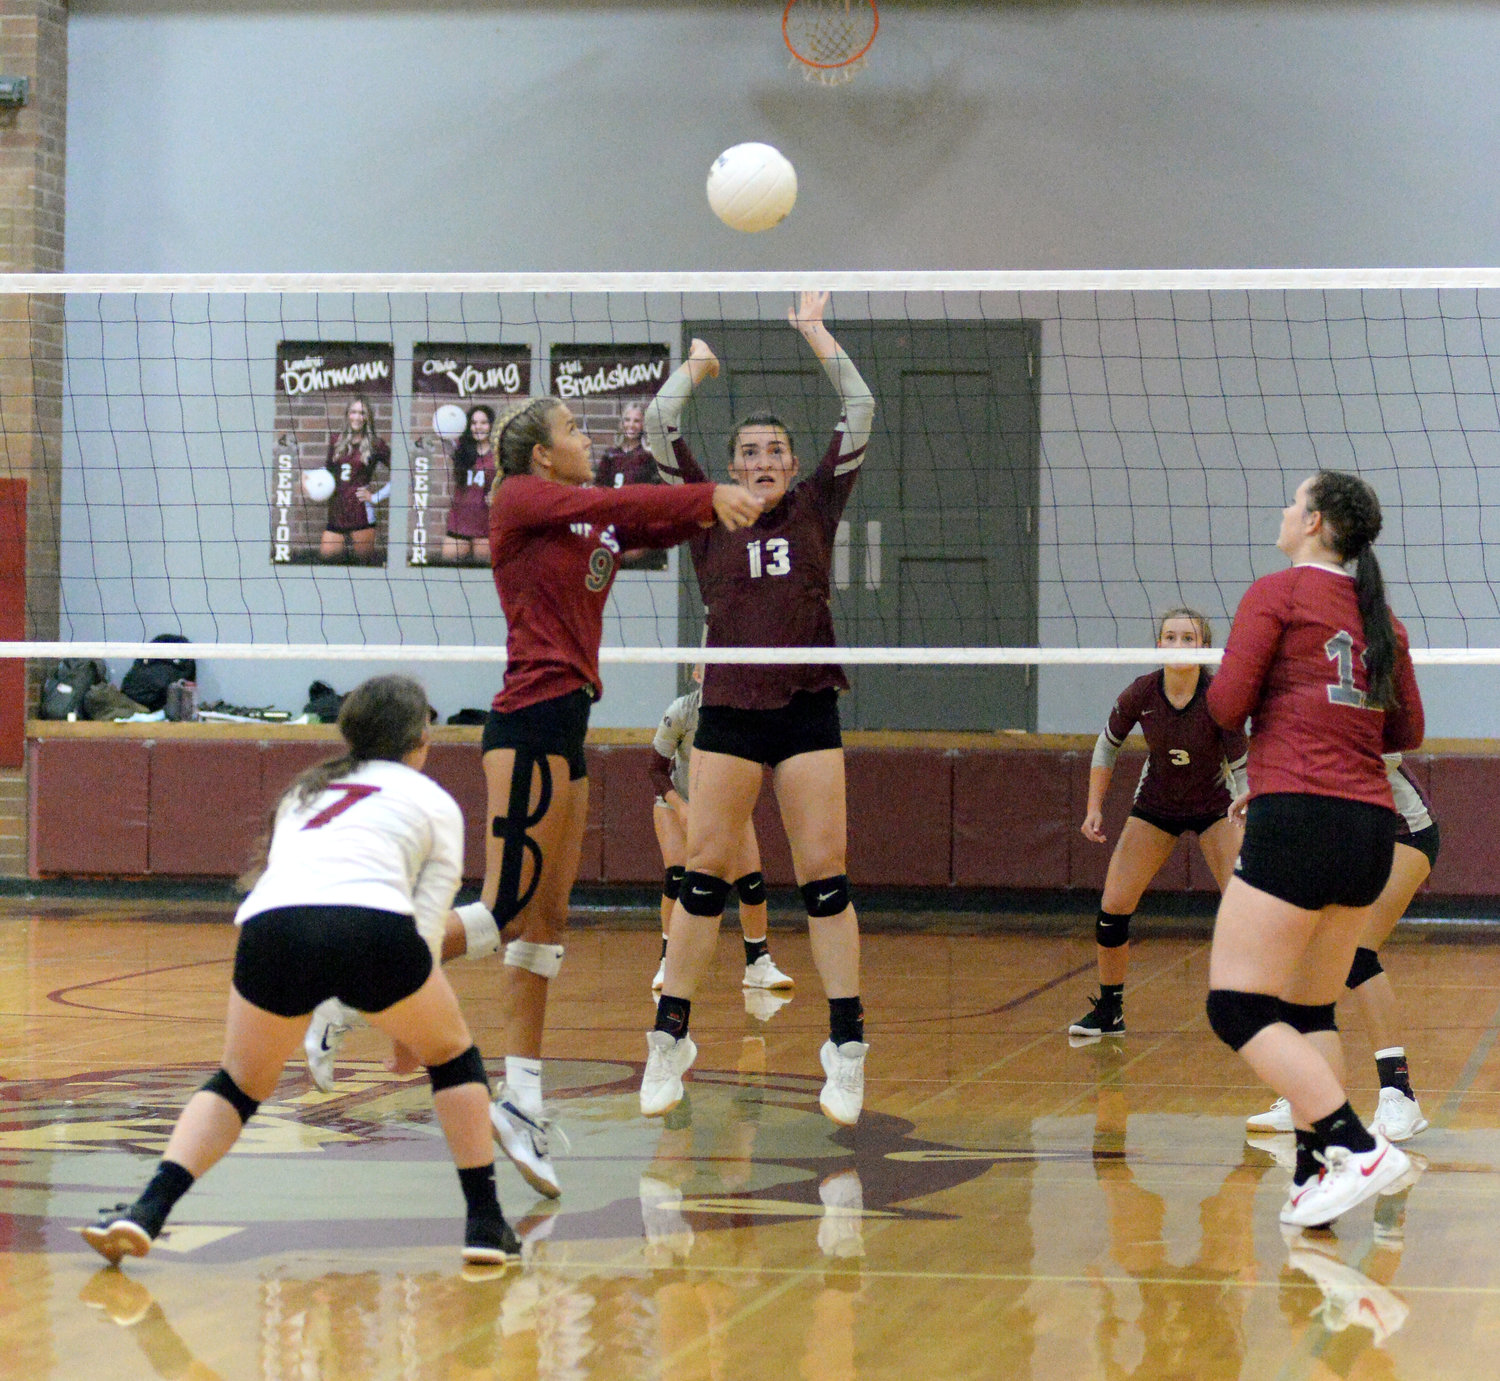 WF West's Ava Olsen gets a shot over the net while Montesano's Addie Winter (13) defends in the Bearcats' 3-2 loss on Tuesday at Bo Griffin Memorial Gymnasium in Montesano.